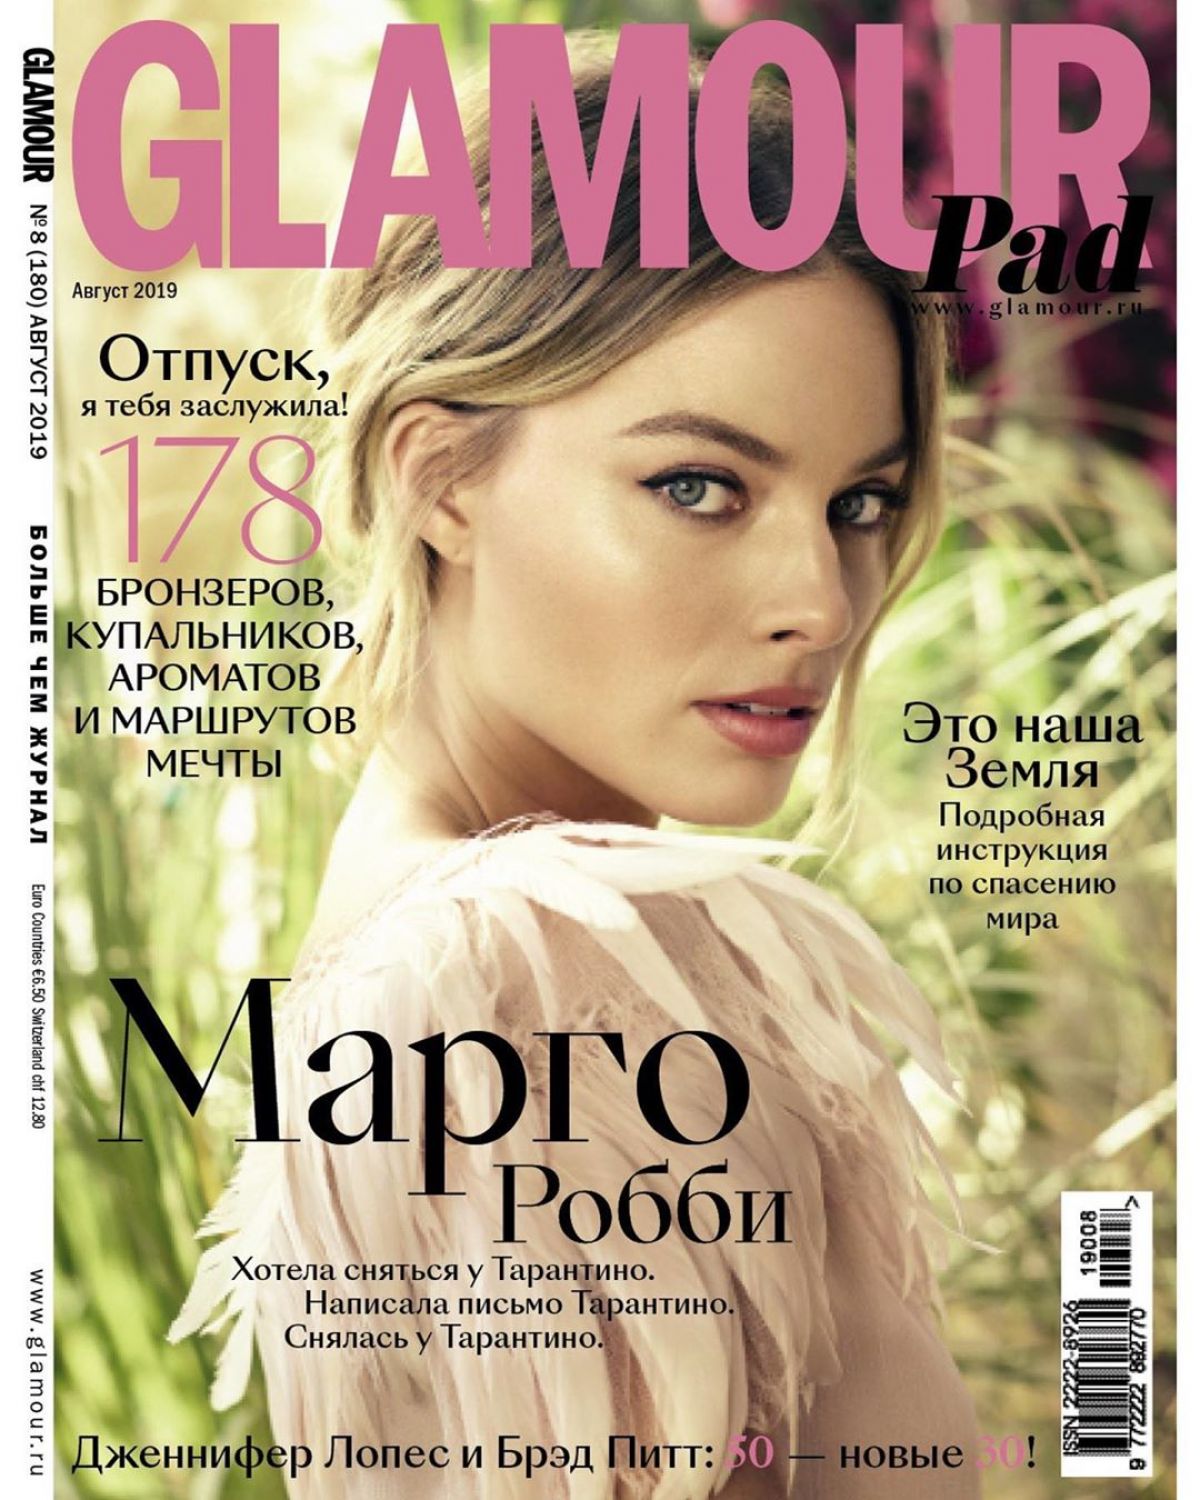 MARGOT ROBBIE on the Cover of Glamour Magazine, Russia August 2019 ...